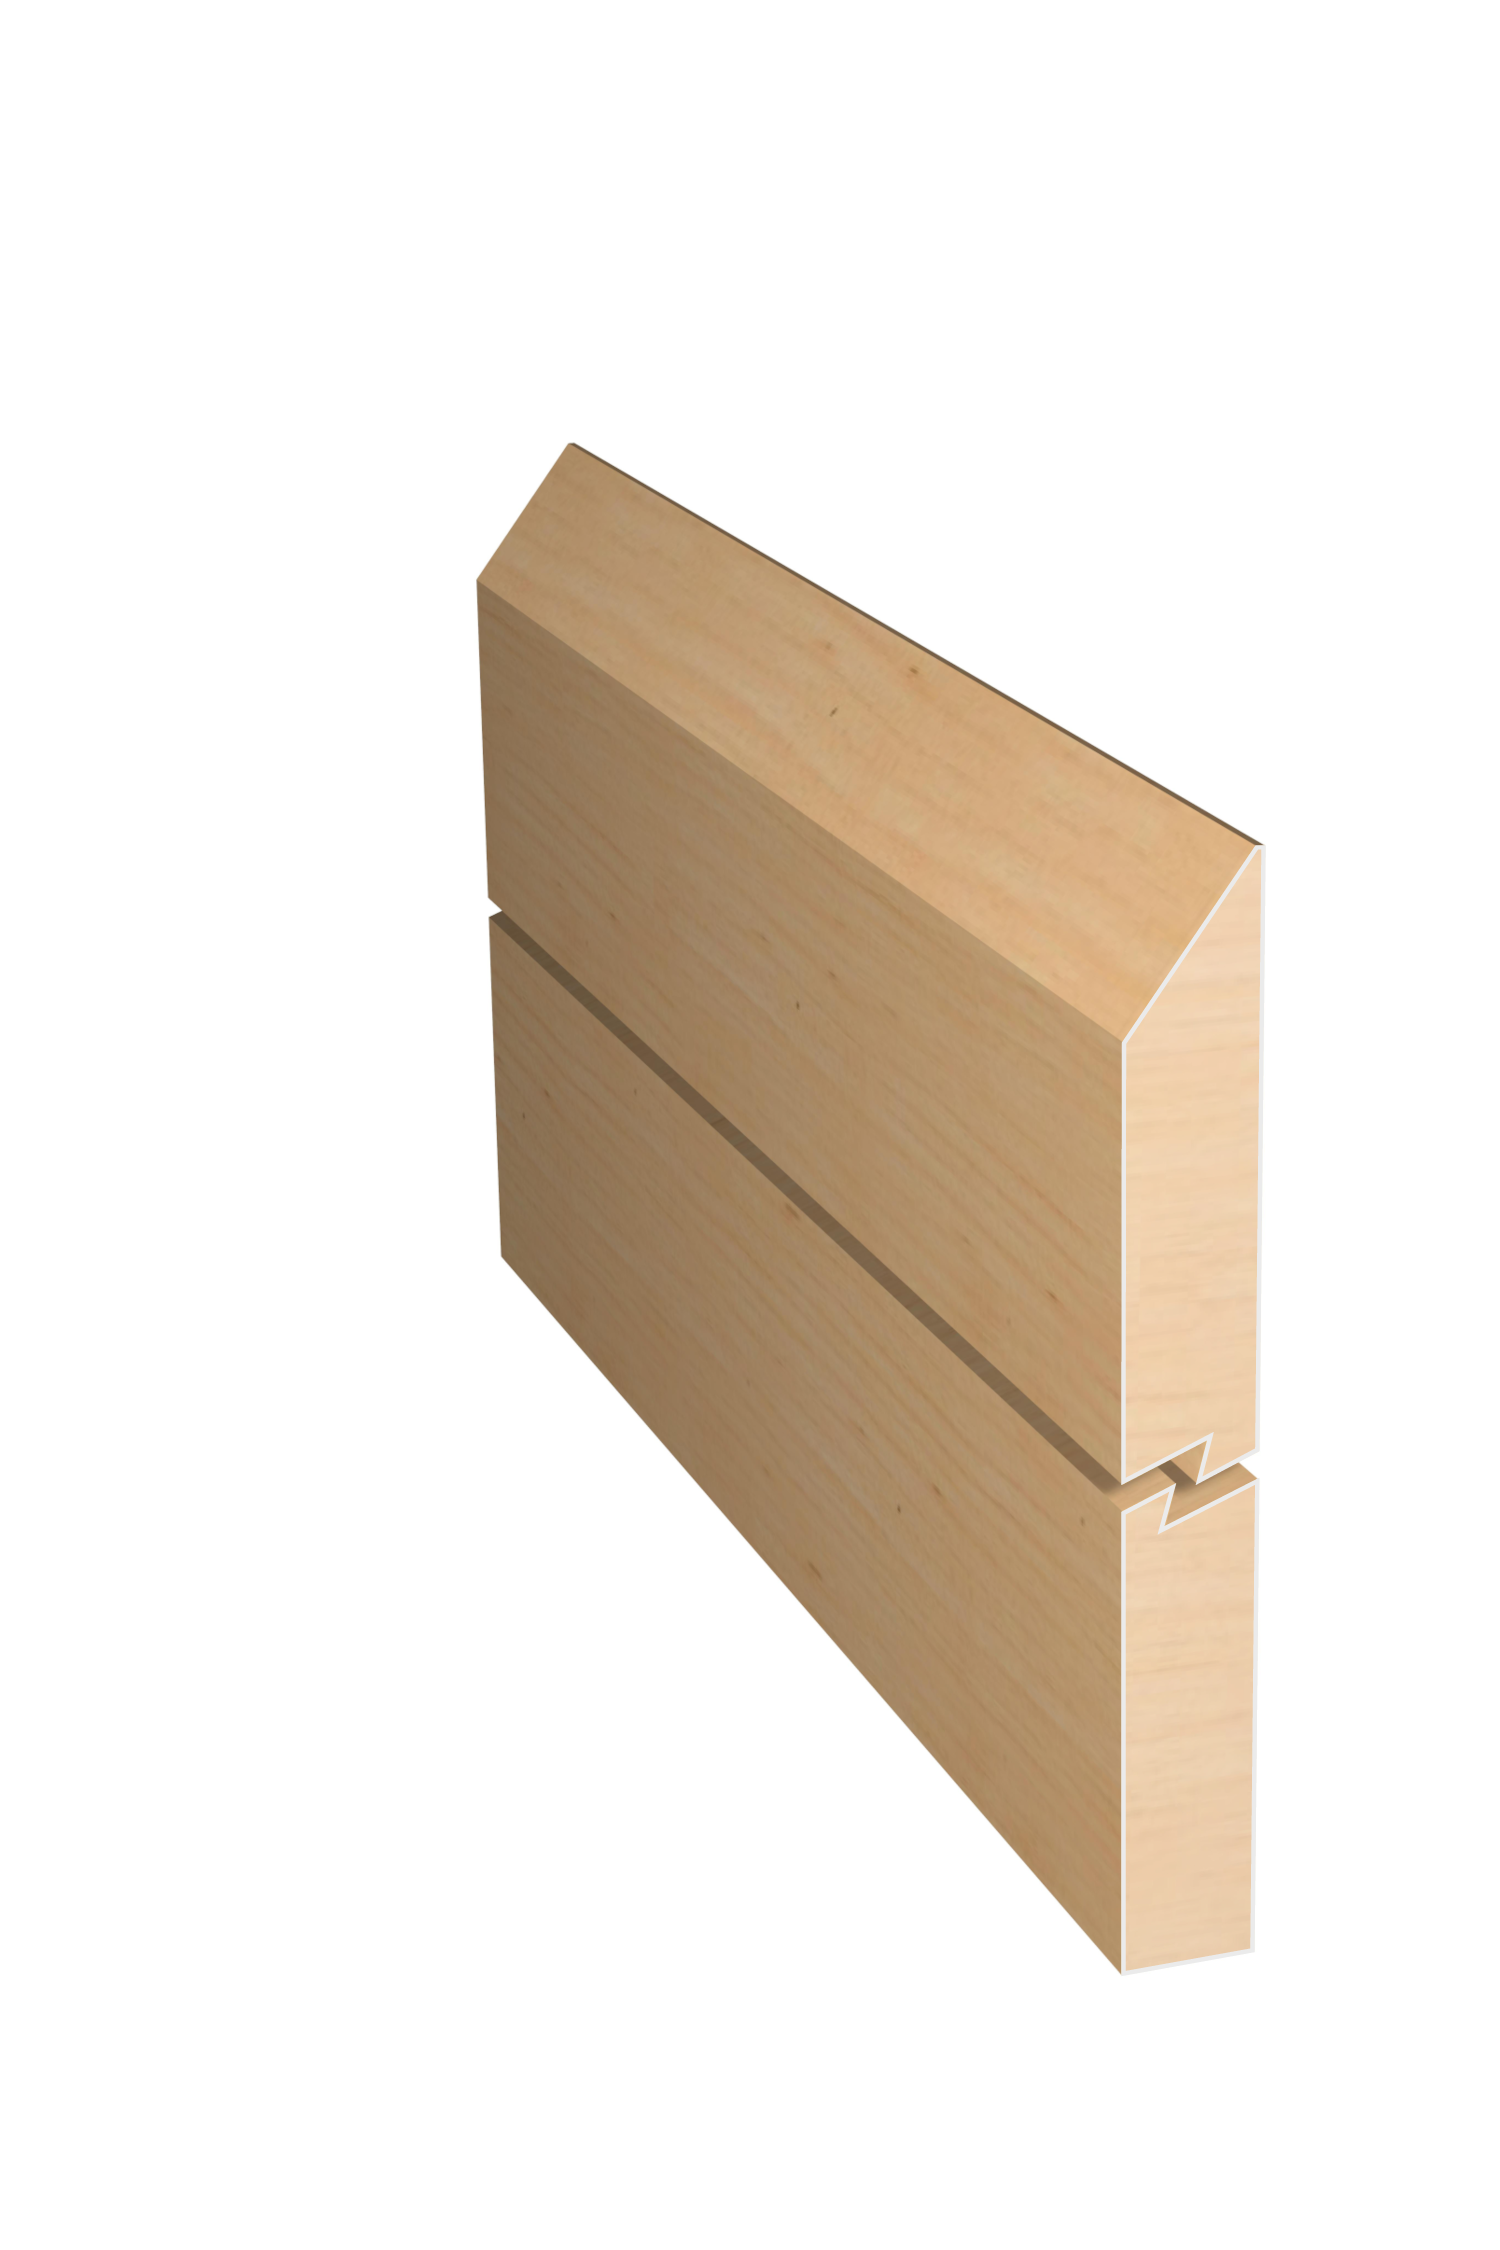 Three dimensional rendering of custom edge profile wood molding SKPL63 made by Public Lumber Company in Detroit.